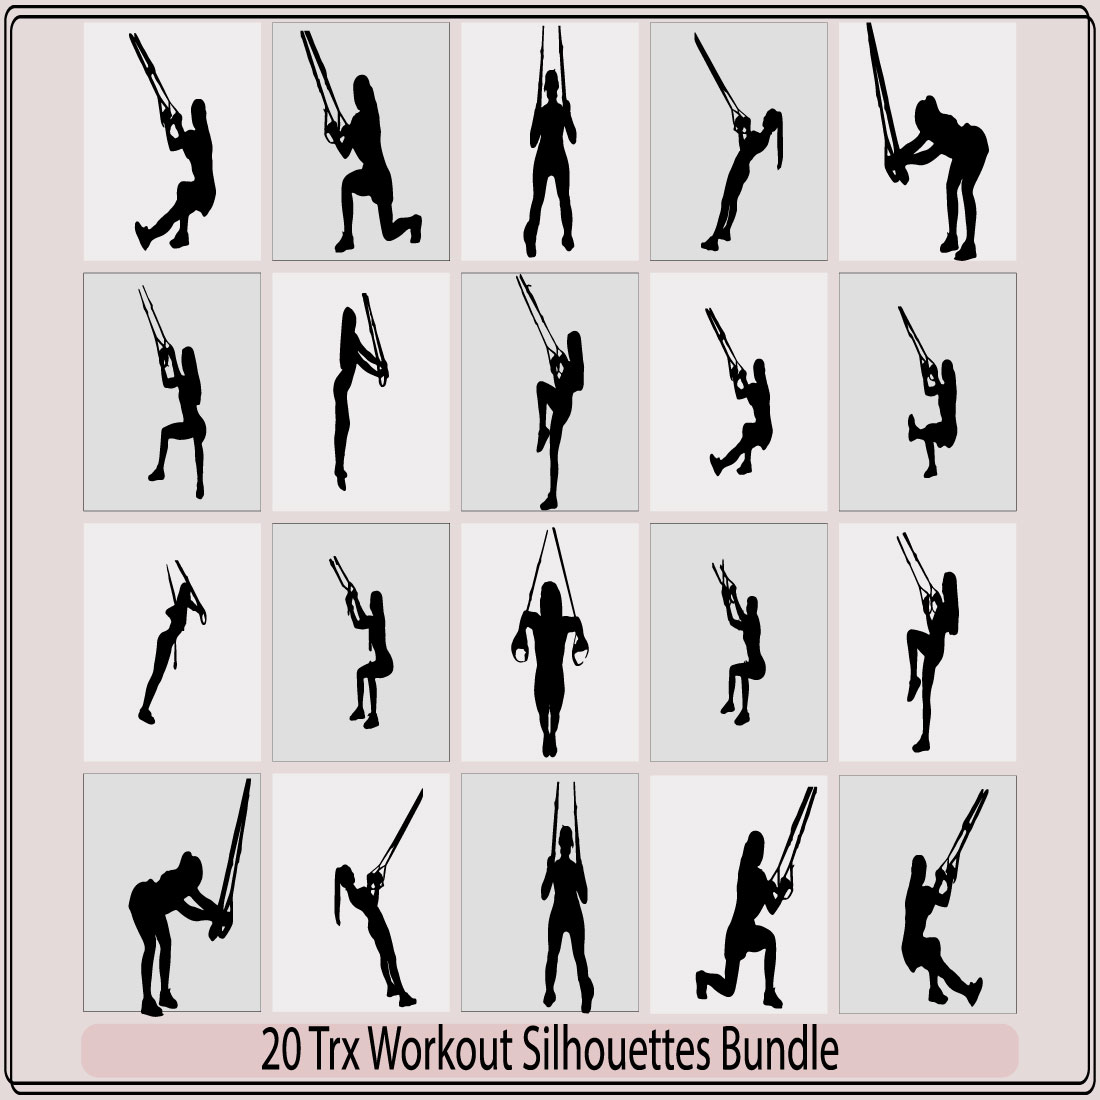 Silhouettes of men and women doing TRX exercises,Man workout using resistance band flat vector illustration,suspension training system TRX, vector illustration cover image.